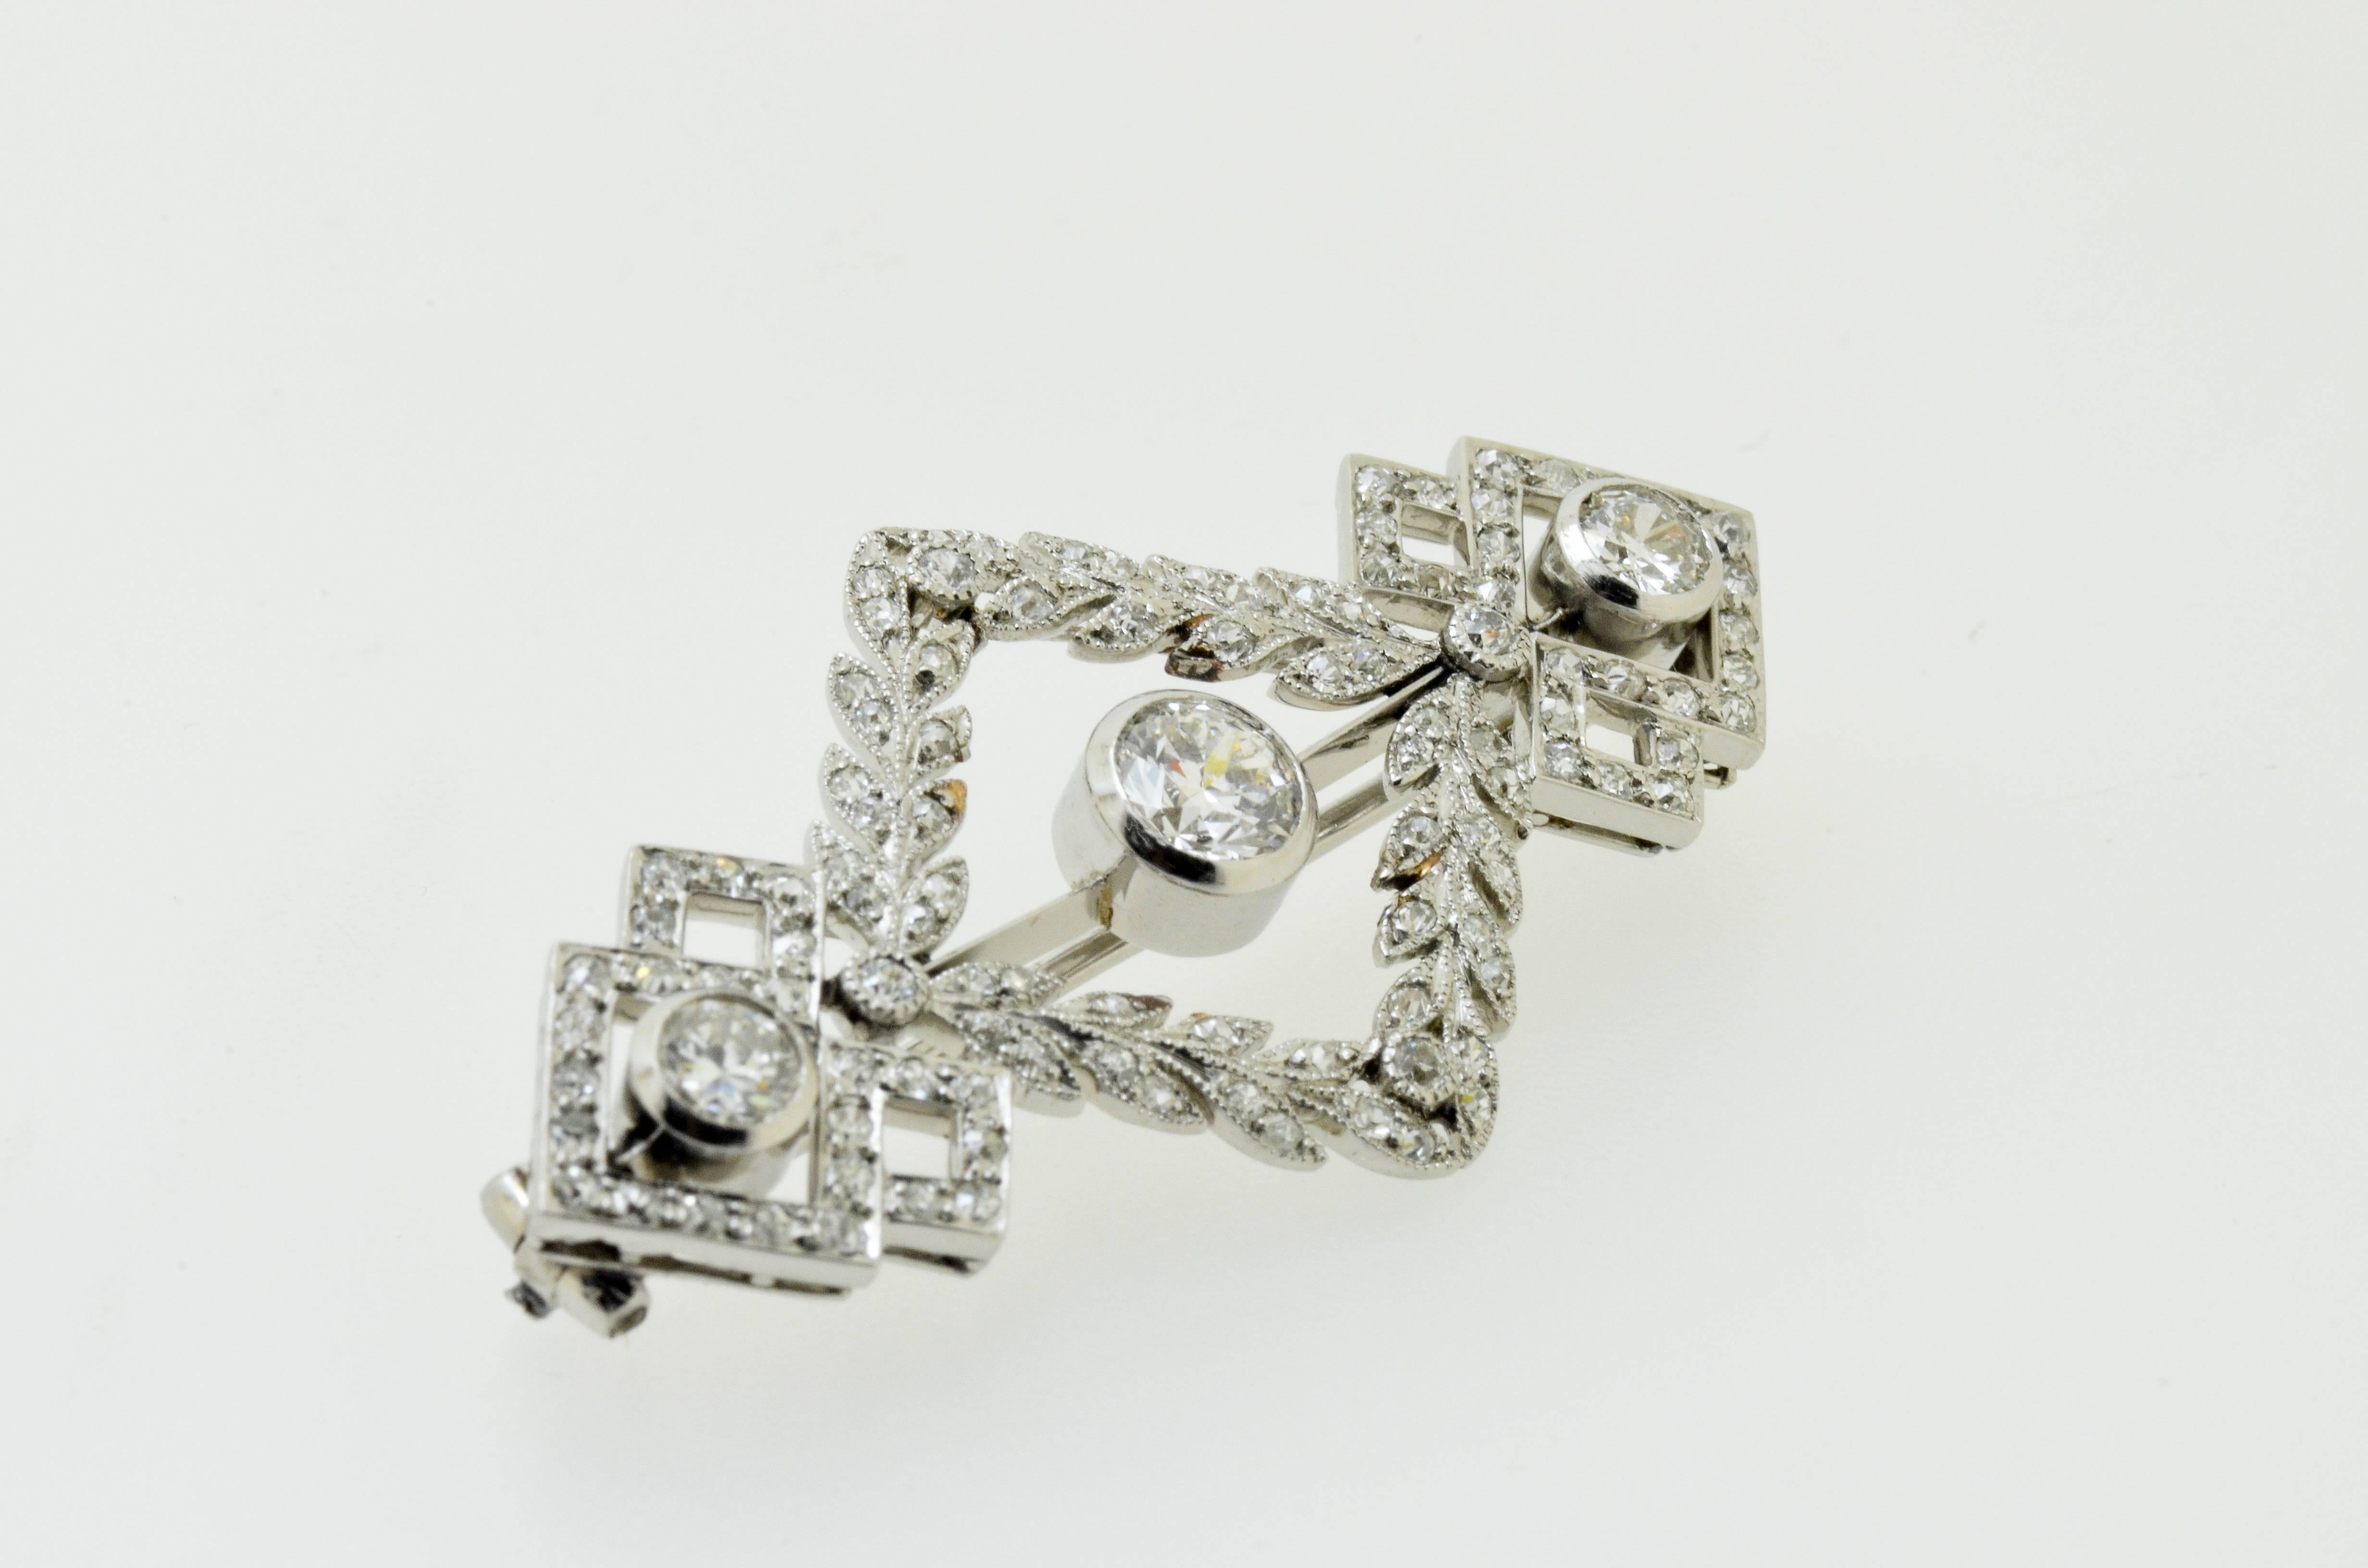 Diamond & Platinum Brooch In Excellent Condition For Sale In Fuengirola, Malaga